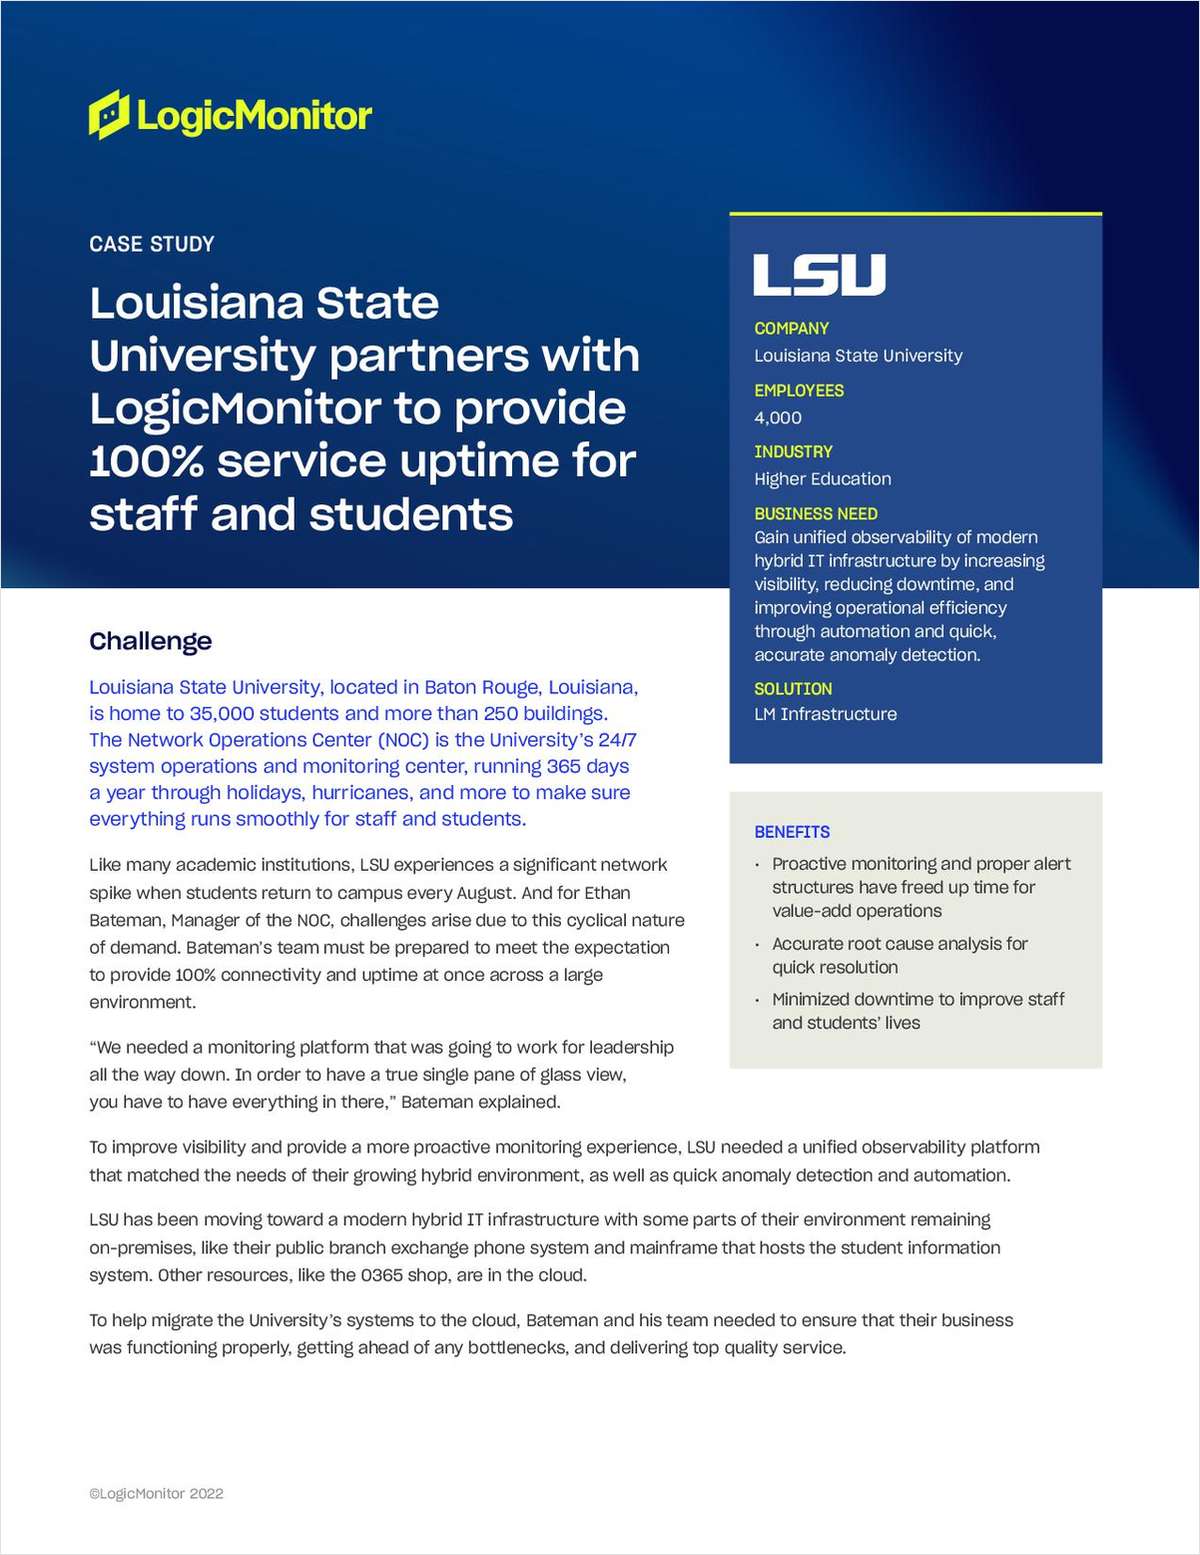 Louisiana State University provides 100% service uptime for staff and students